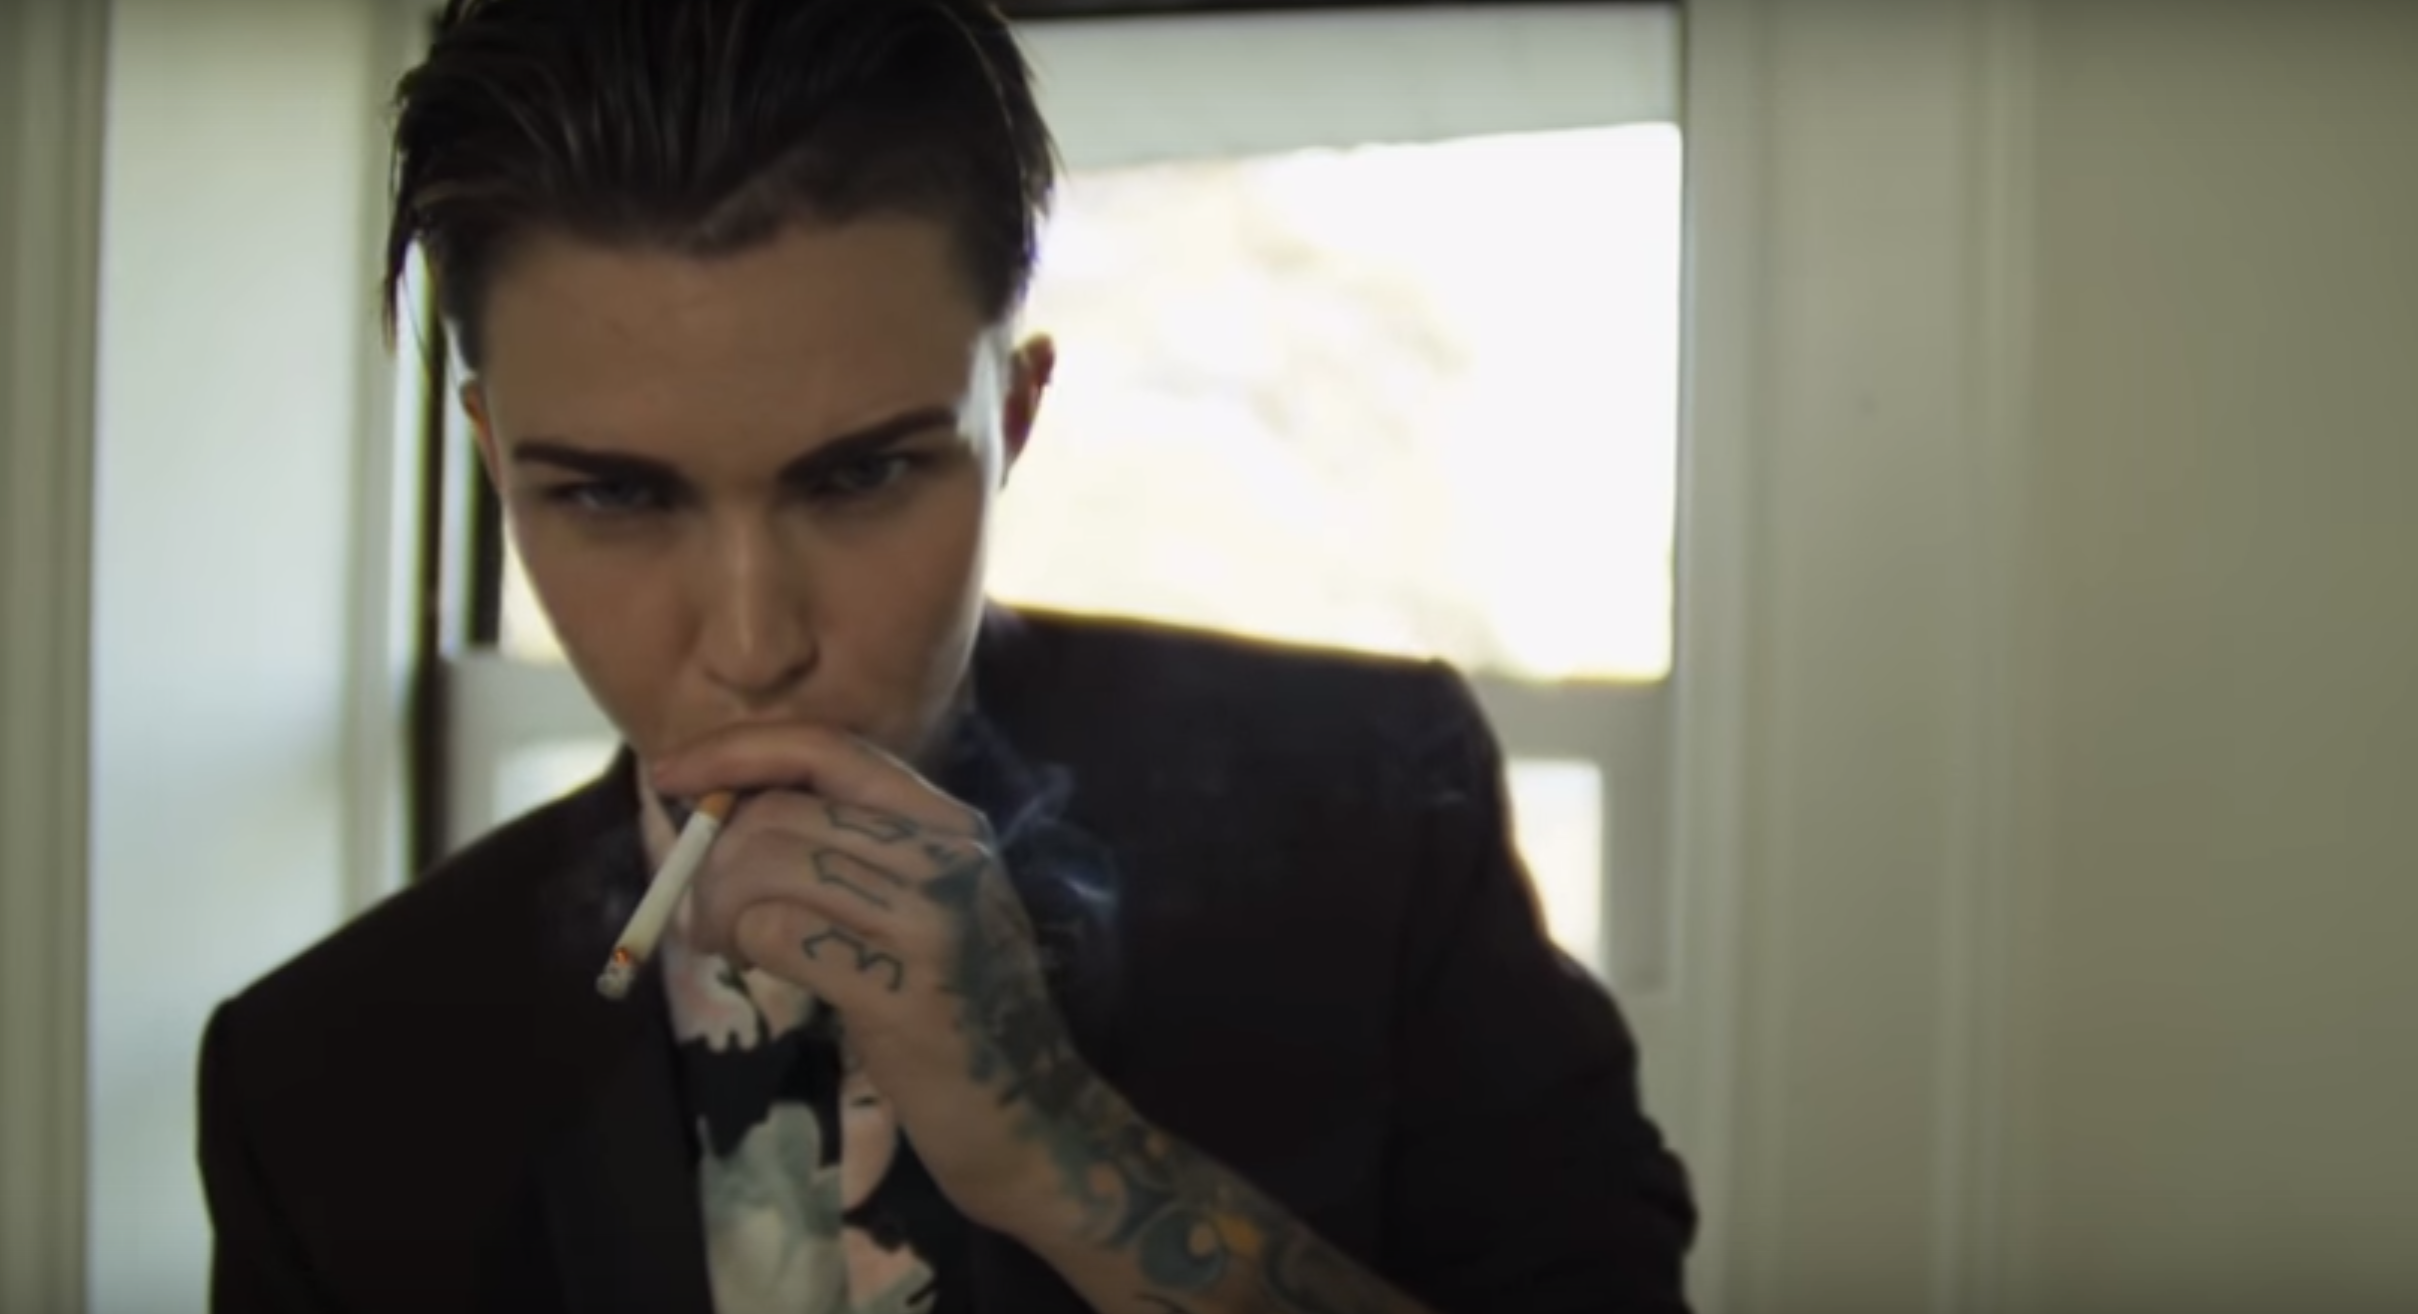 Ruby Rose's Best Moments Challenging Gender Stereotypes - ATTN: